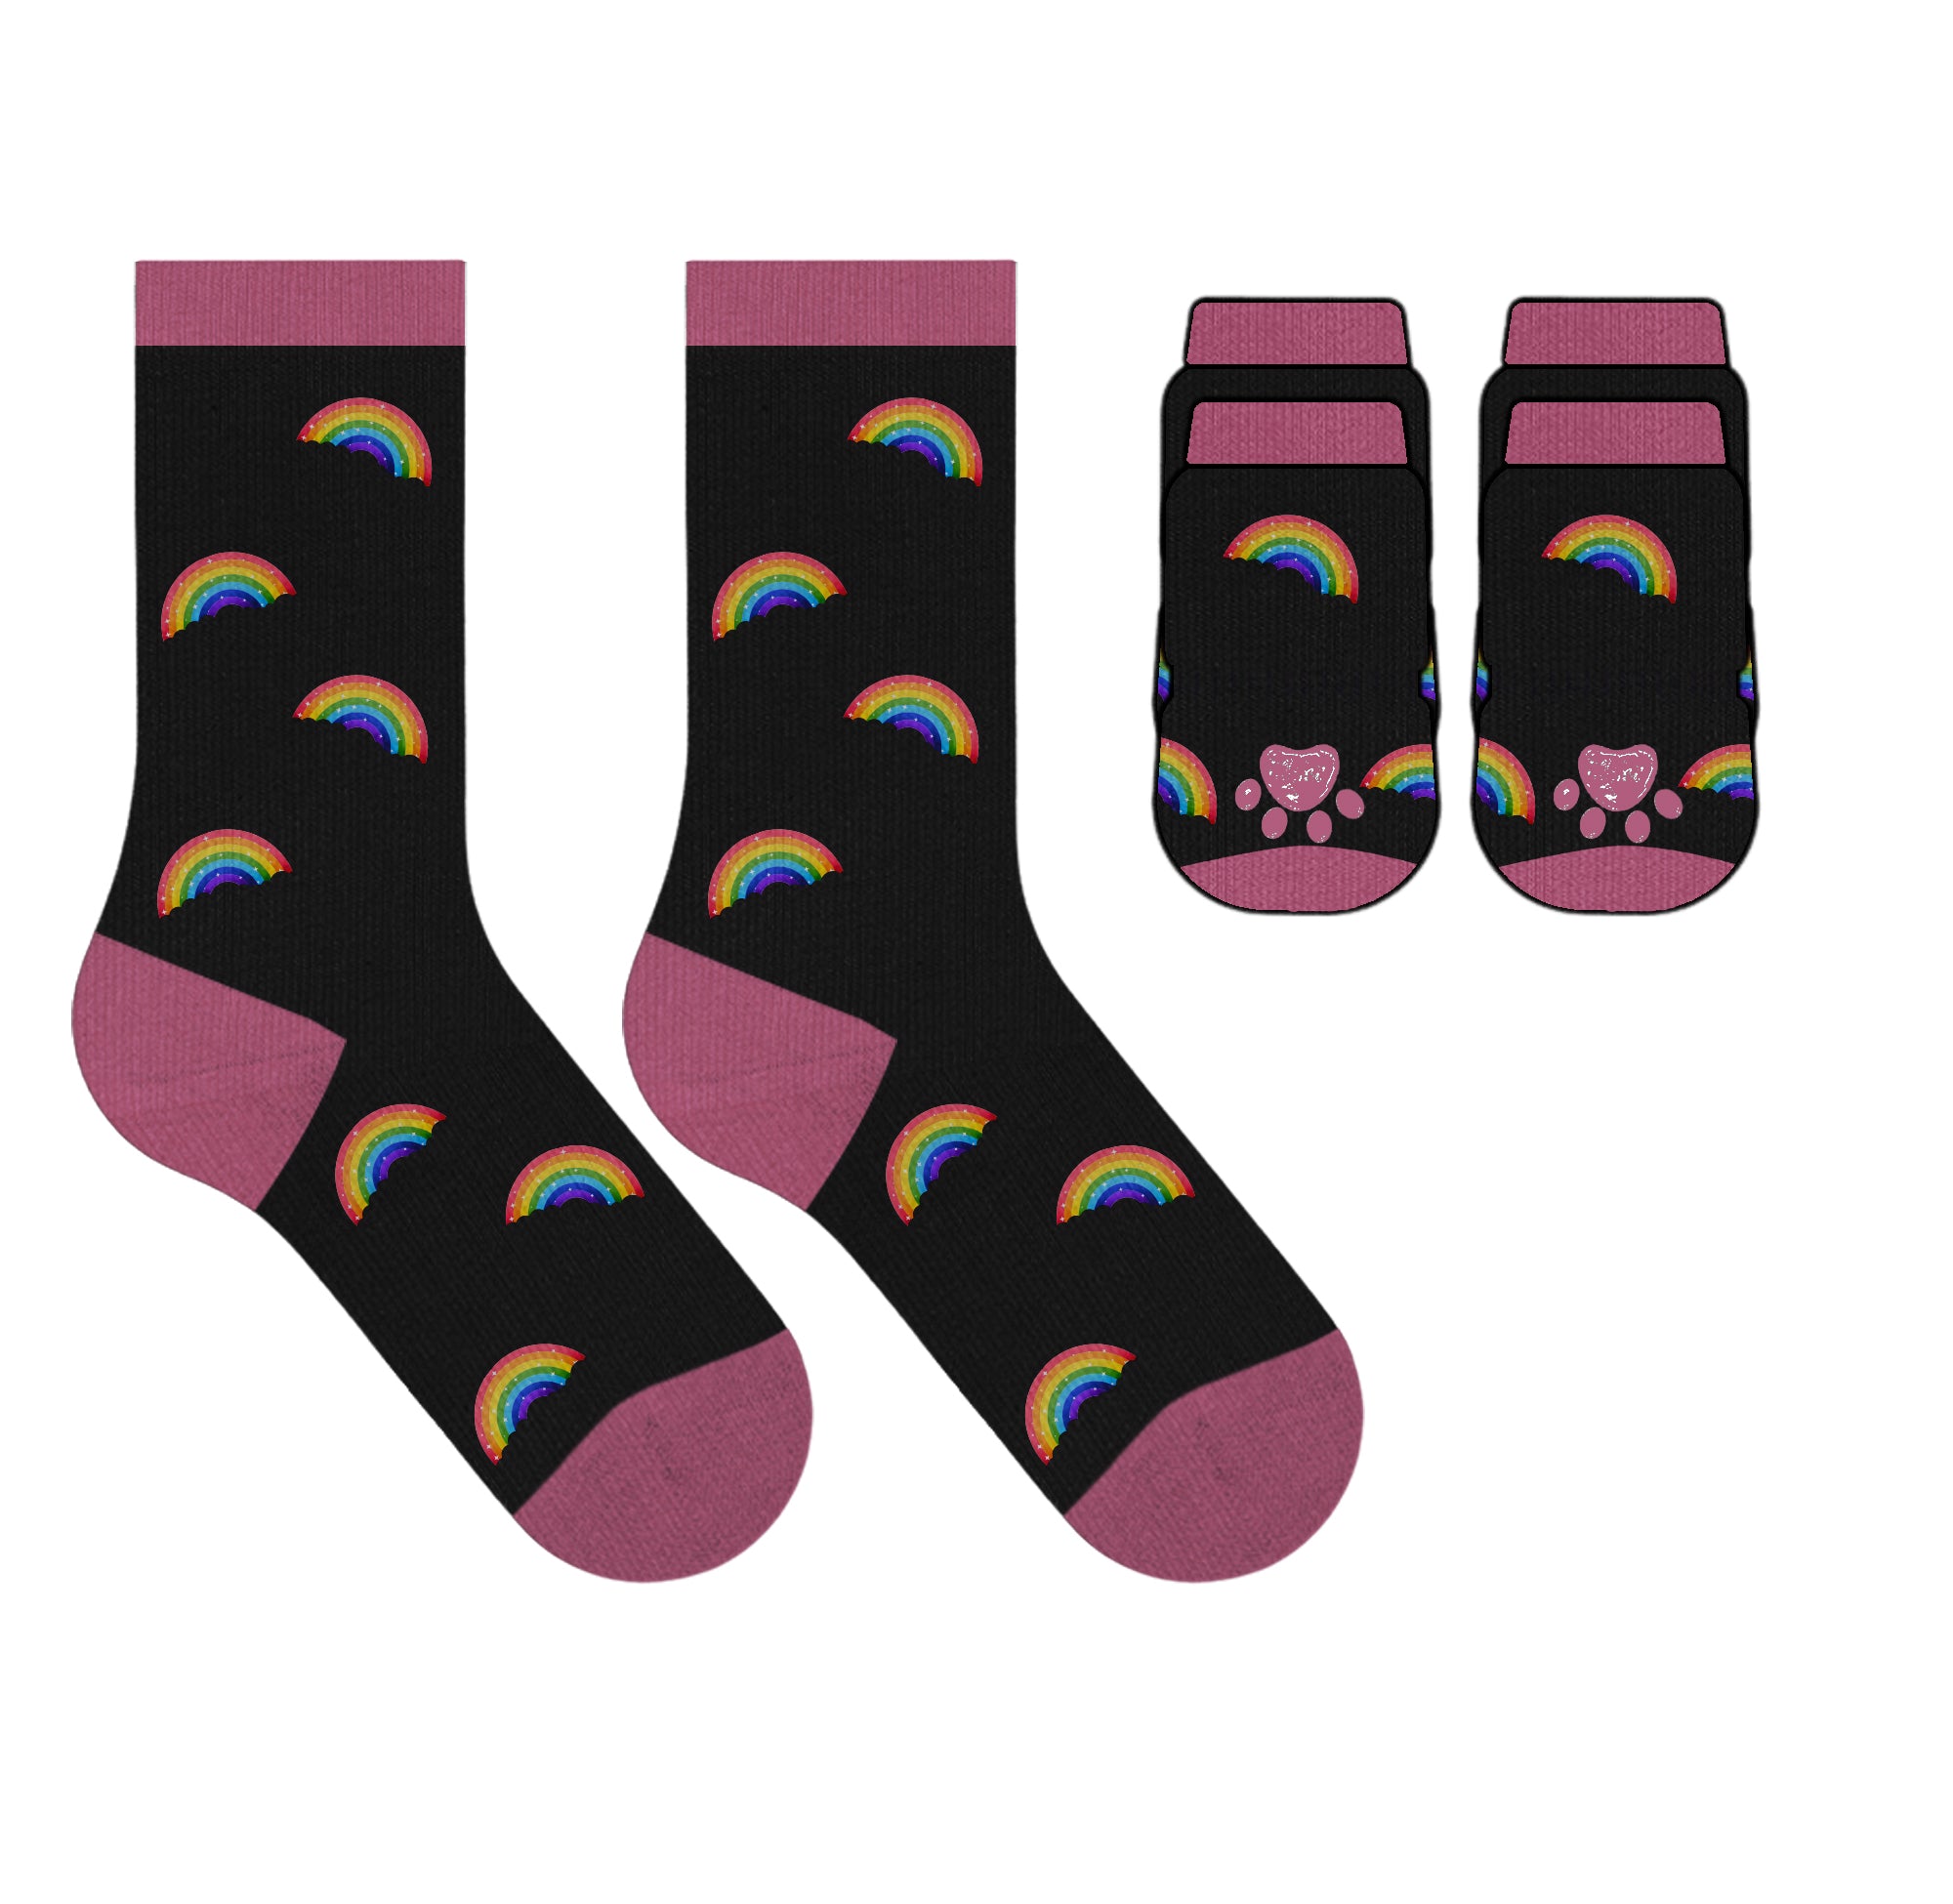 Matching Pet And Owner Fun Socks - One Size